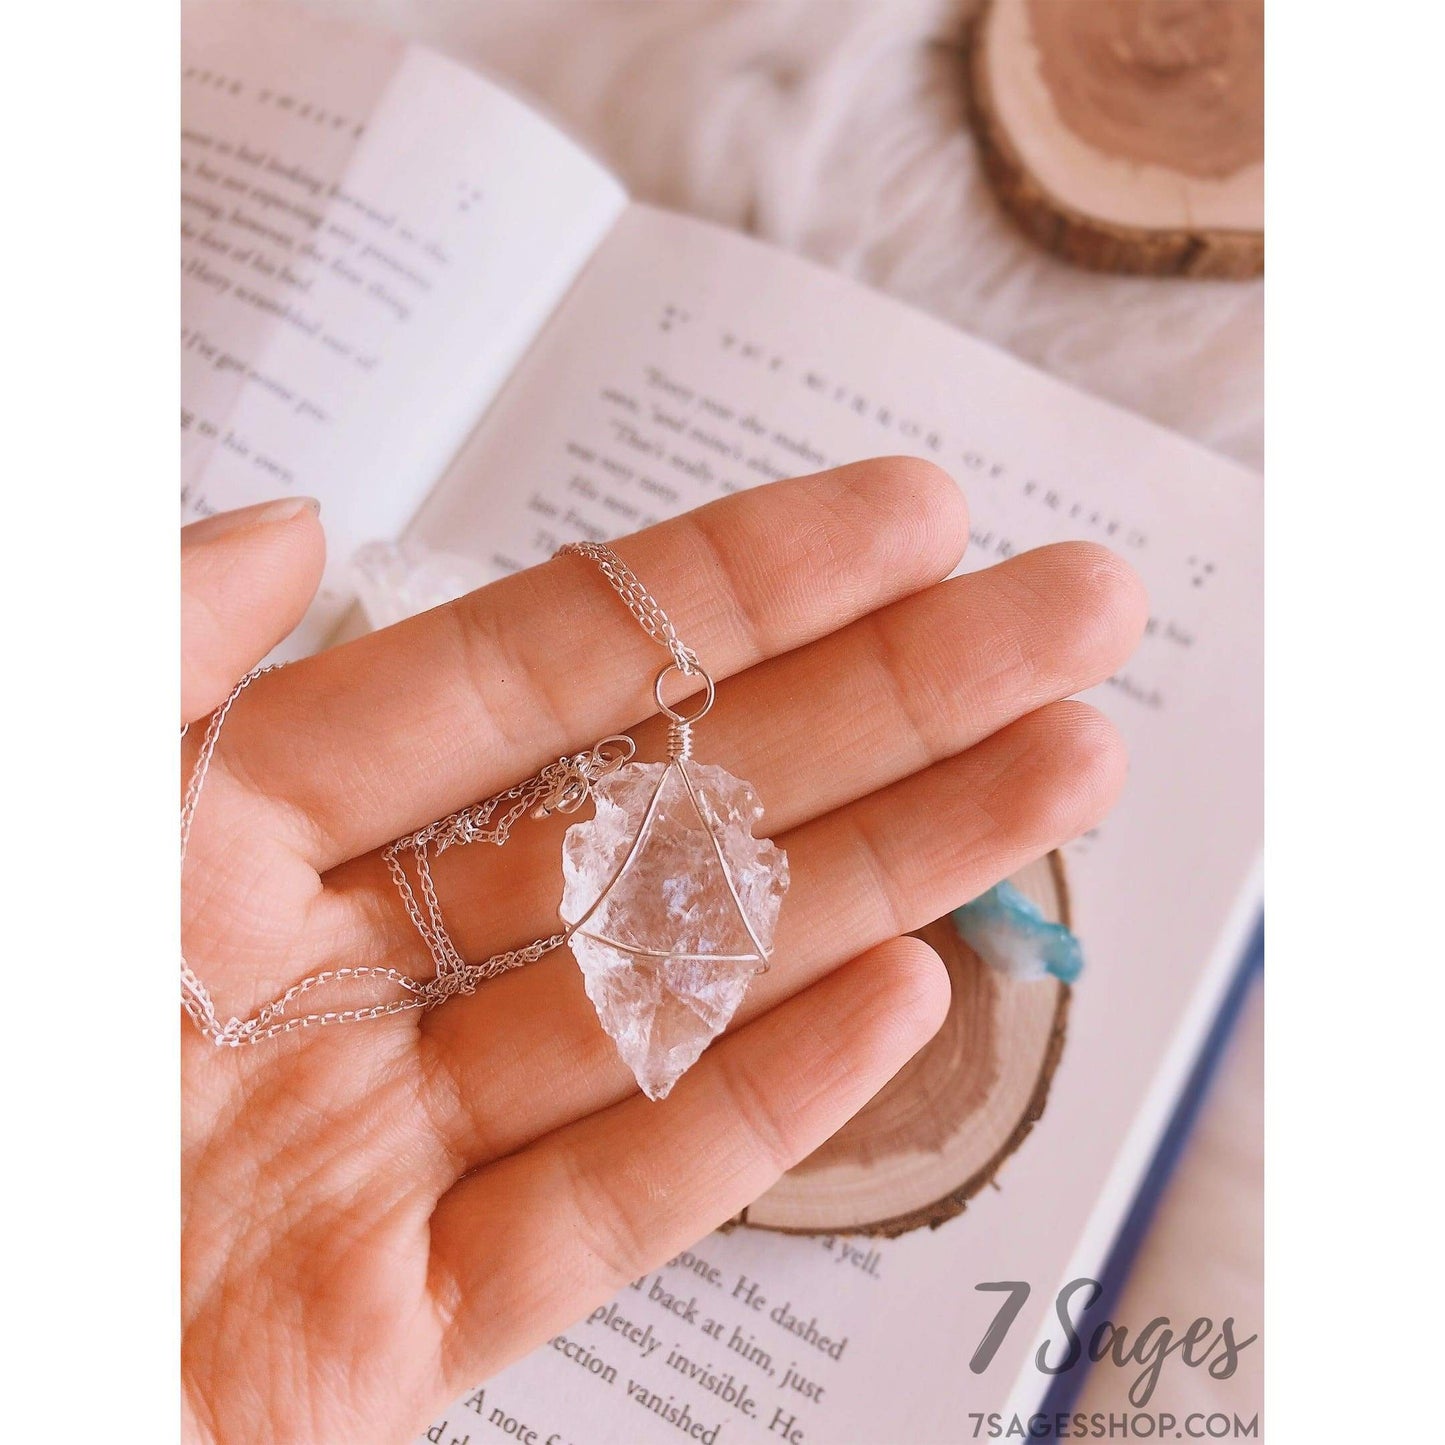 Crystal Layered Silver Necklace - Sterling Silver Necklace - Healing Crystals and Stones - Crystals - Boho Layered Crystal Necklace